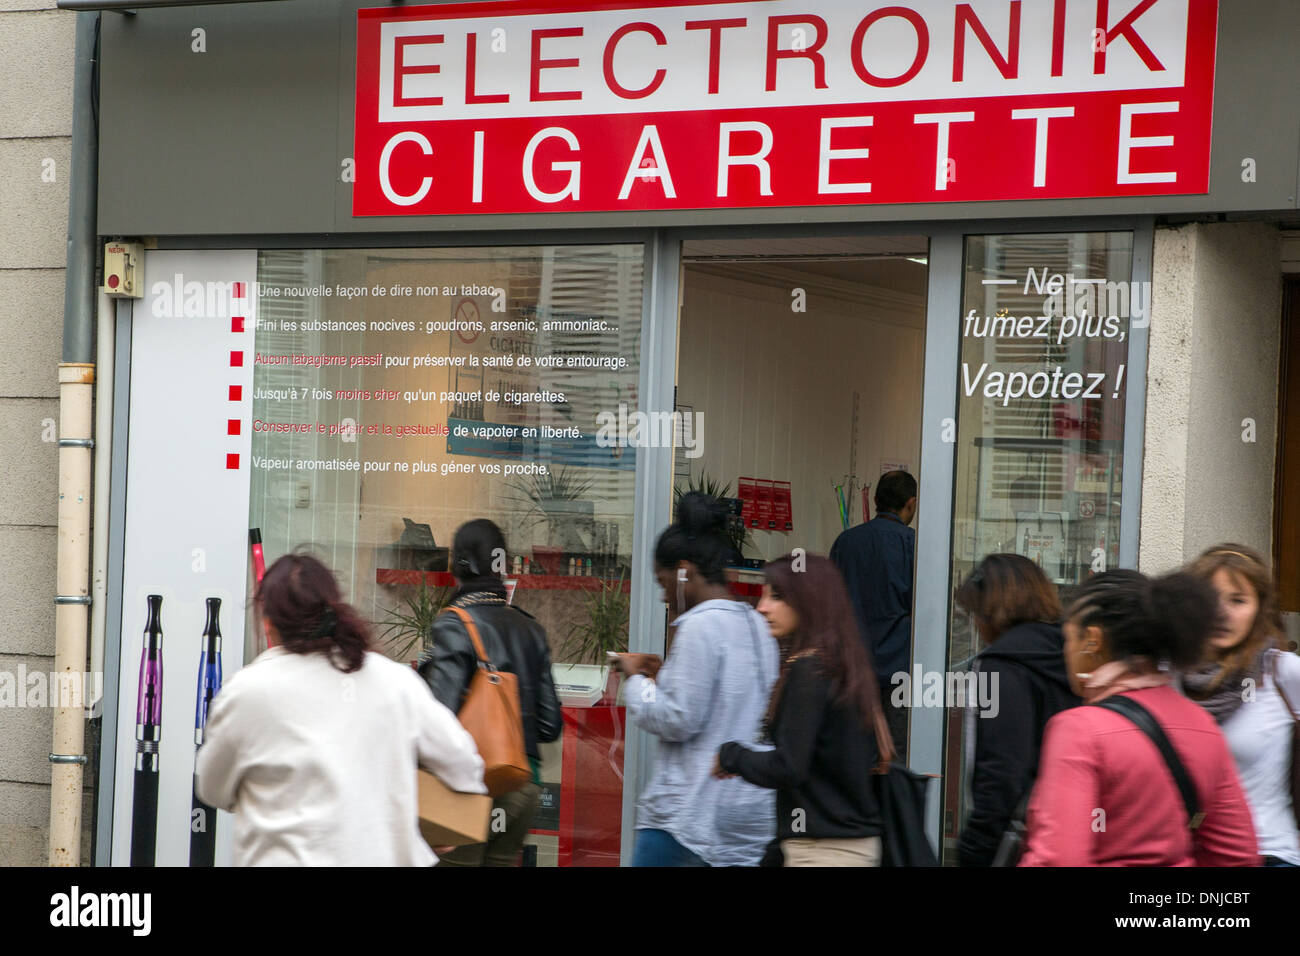 STORE SELLING E-CIGARETTES (ELECTRONIK CIGARETTE), SIGN SAYING SMOKE NO MORE, TRY VAPING, CHARTRES, CHARTRES, EURE-ET-LOIR (28), FRANCE Stock Photo